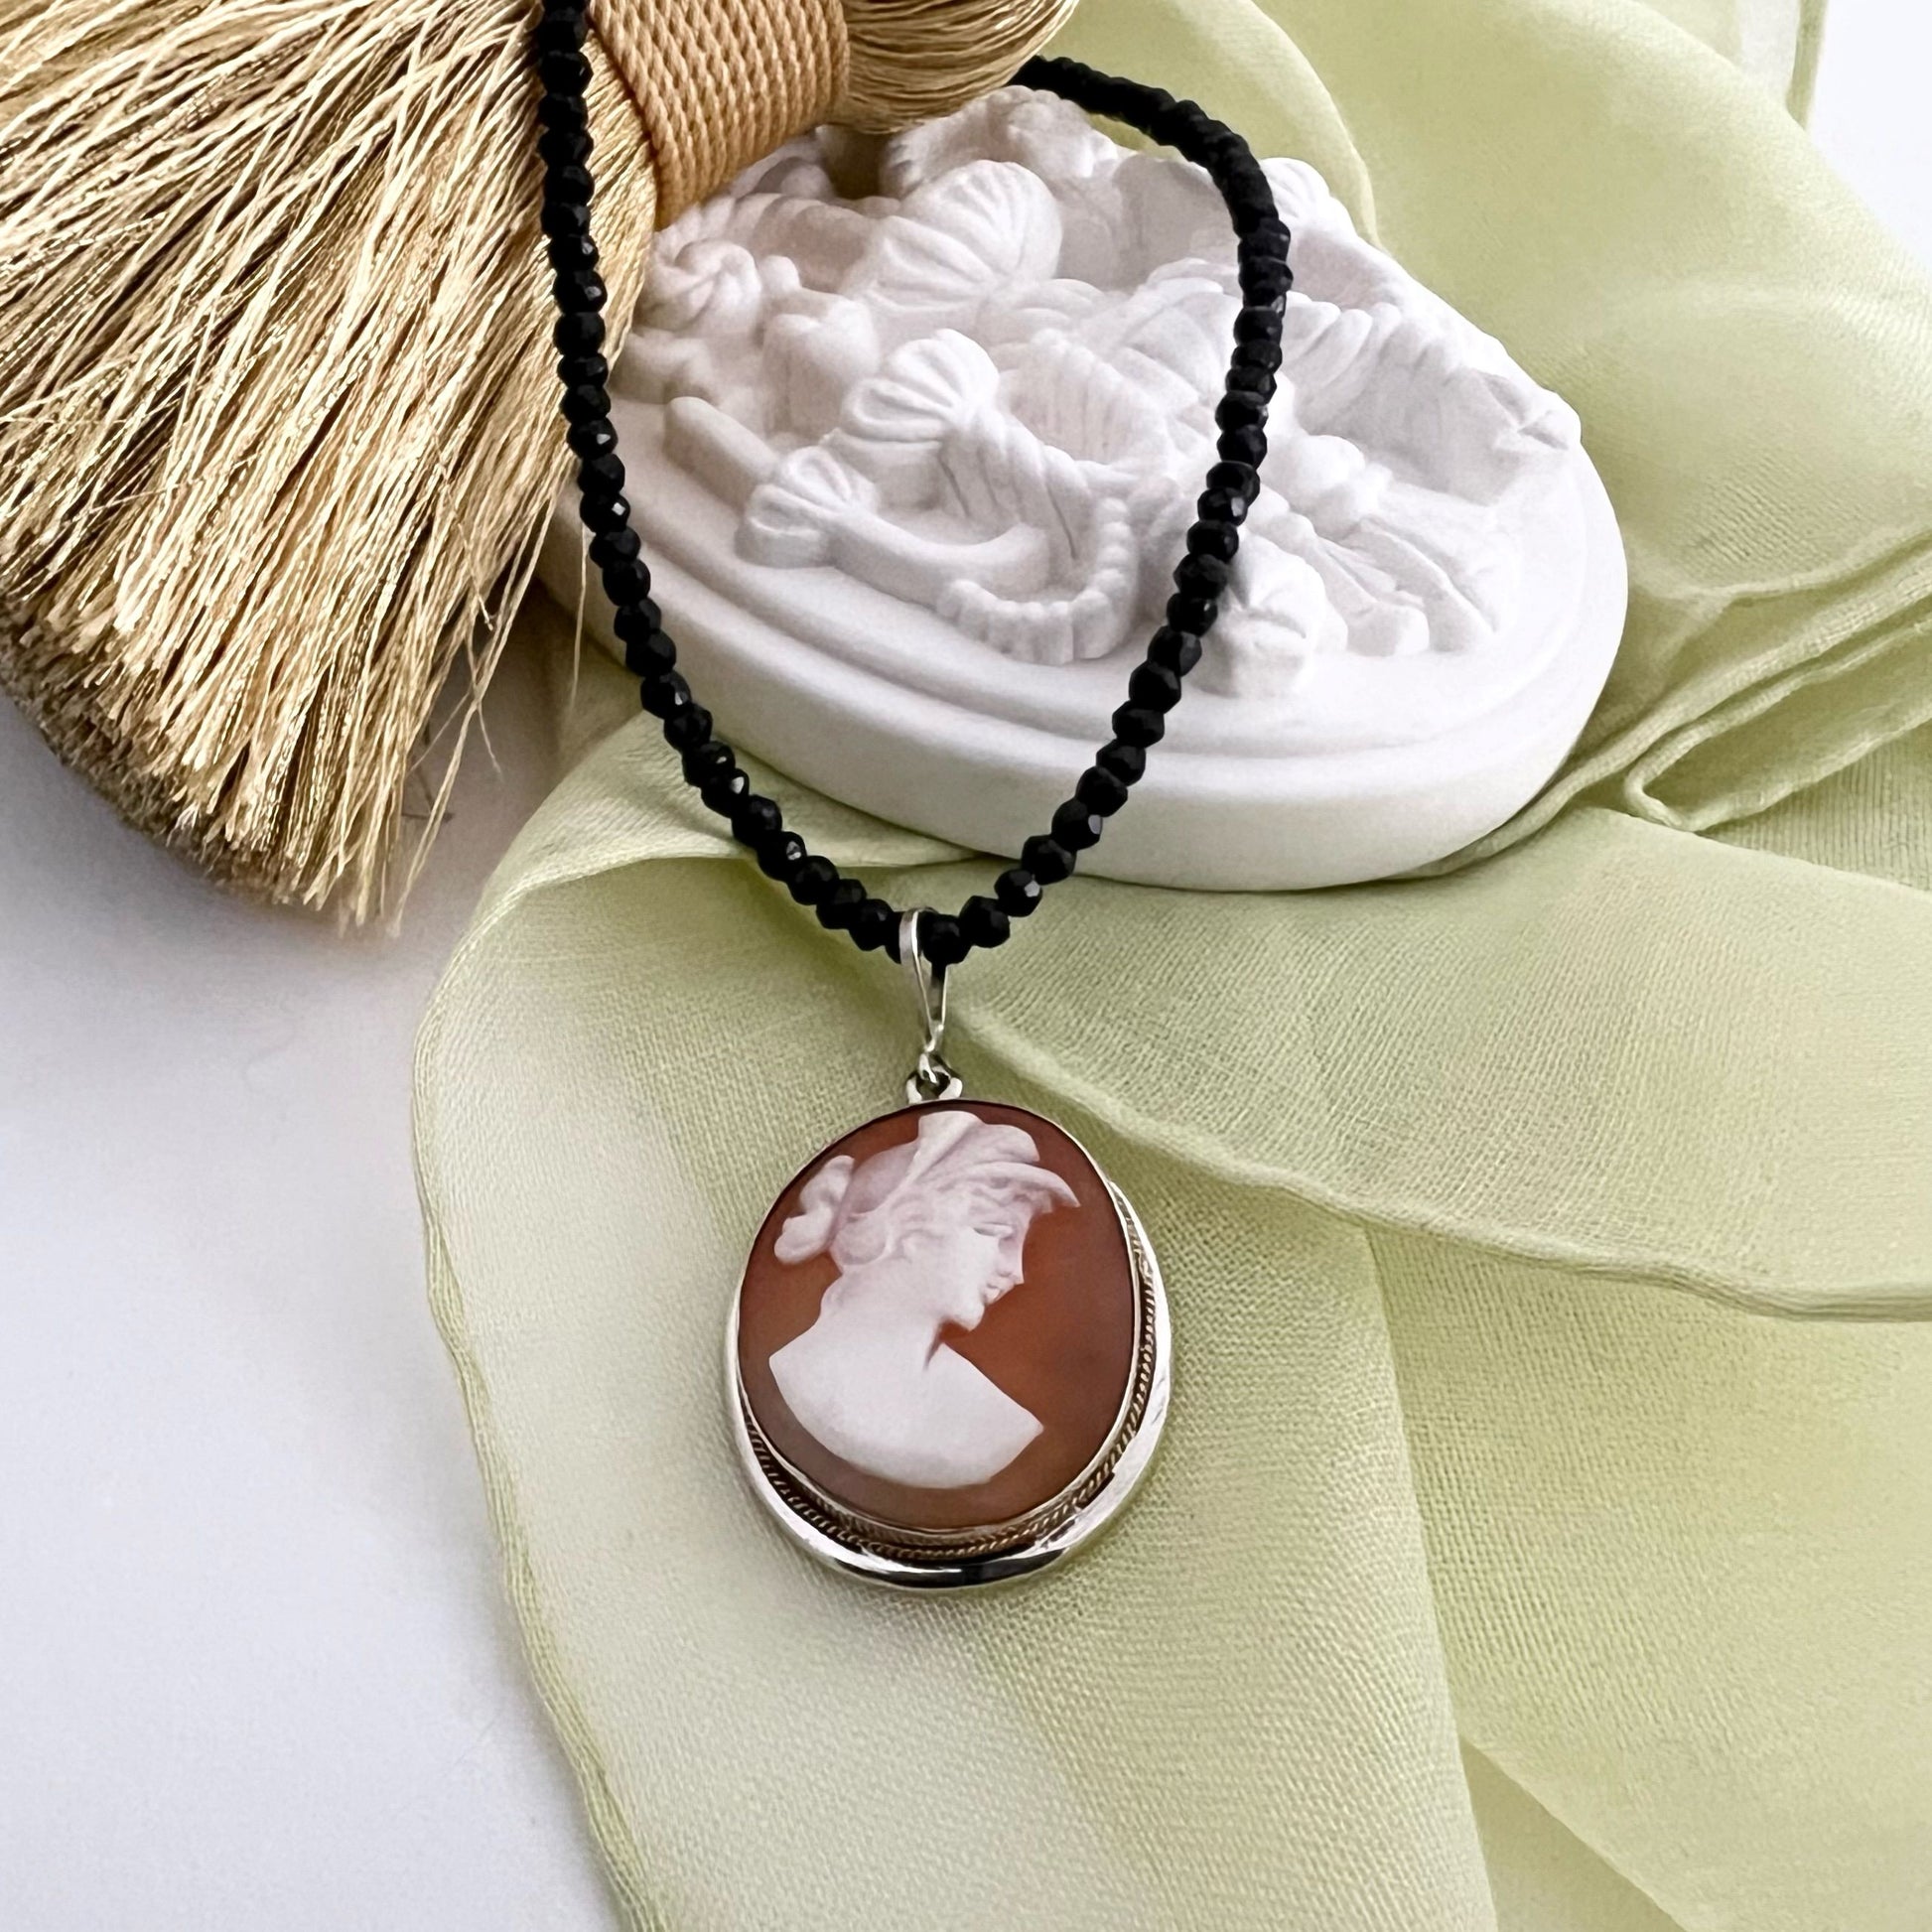 Antique sterling silver cameo necklace adorned with elegant black tourmaline pearls. The cameo depicts a profile of a woman in the roman style.